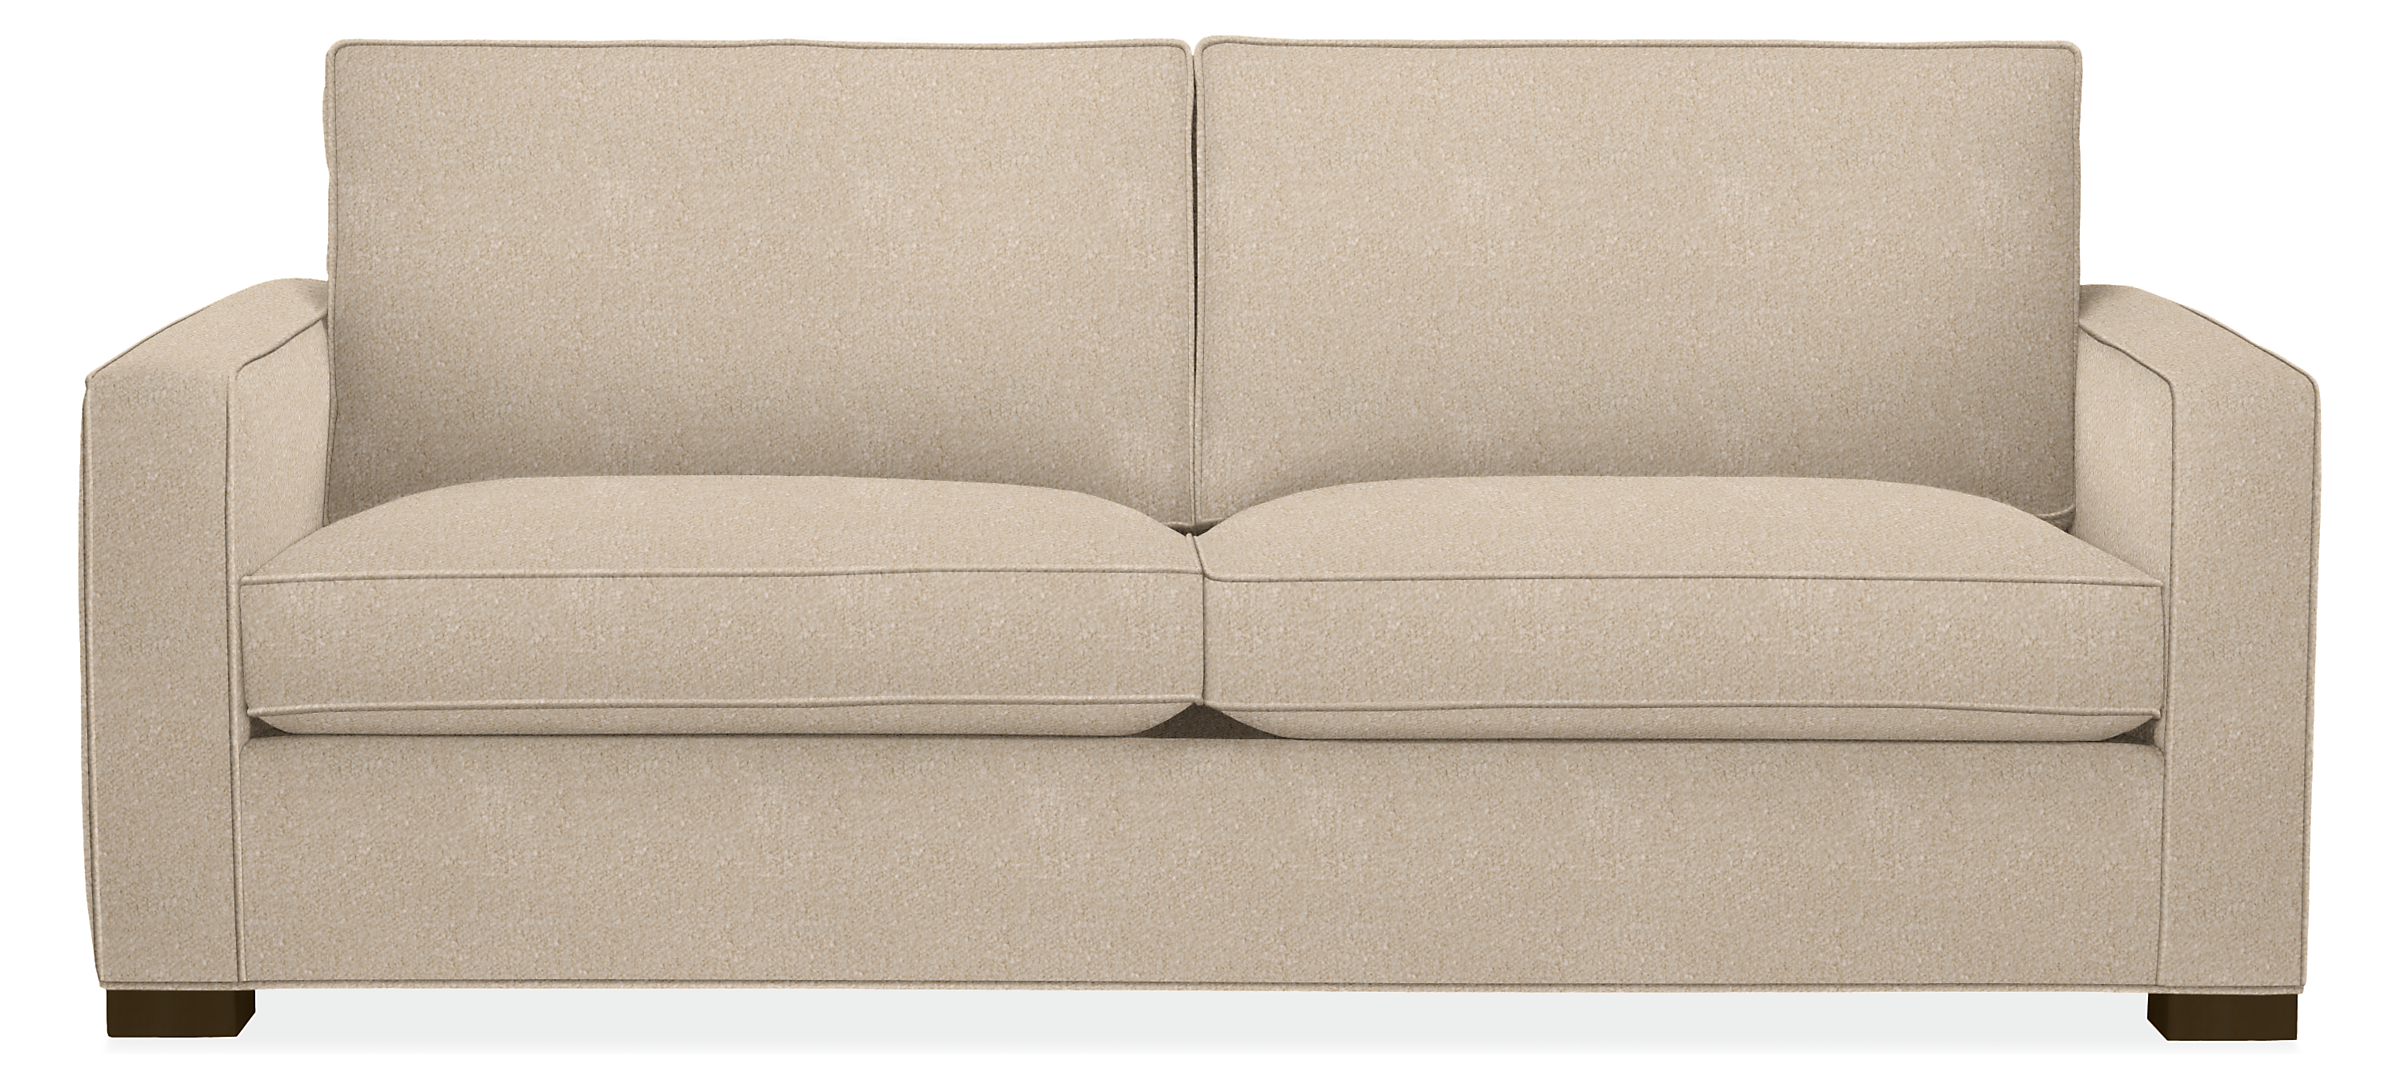 Morrison 86" Sofa in Dornick Ivory with Charcoal Legs